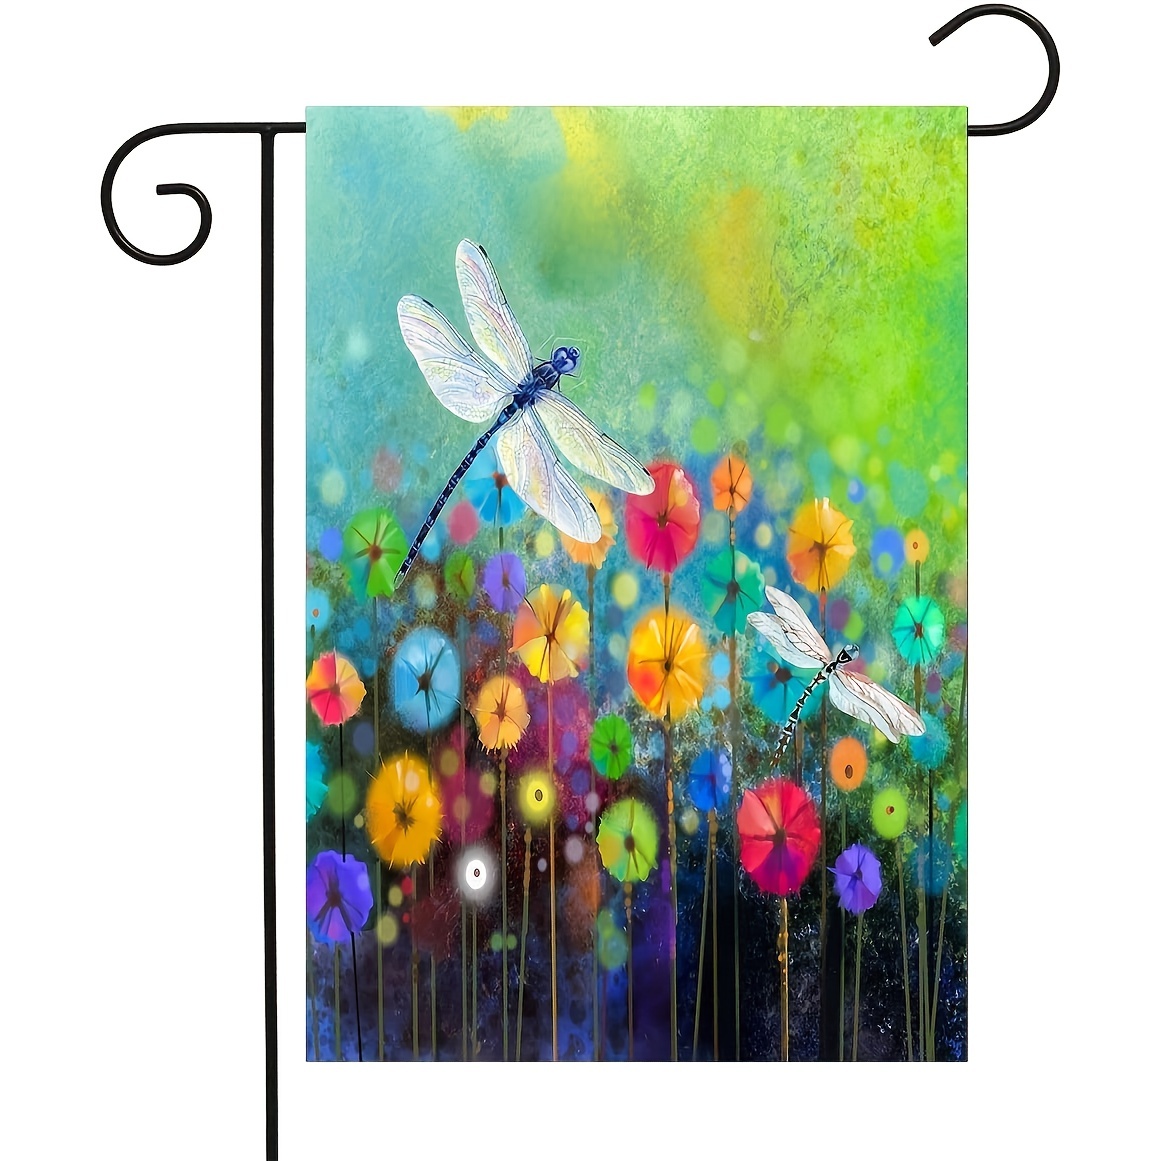 1pc Flowers Garden Flag Dragonfly House Flag Spring Welcome Garden Flags Double Sided Floral Flags For Patio Lawn Home Outdoor Decor No Metal Brace 12x18 Inch